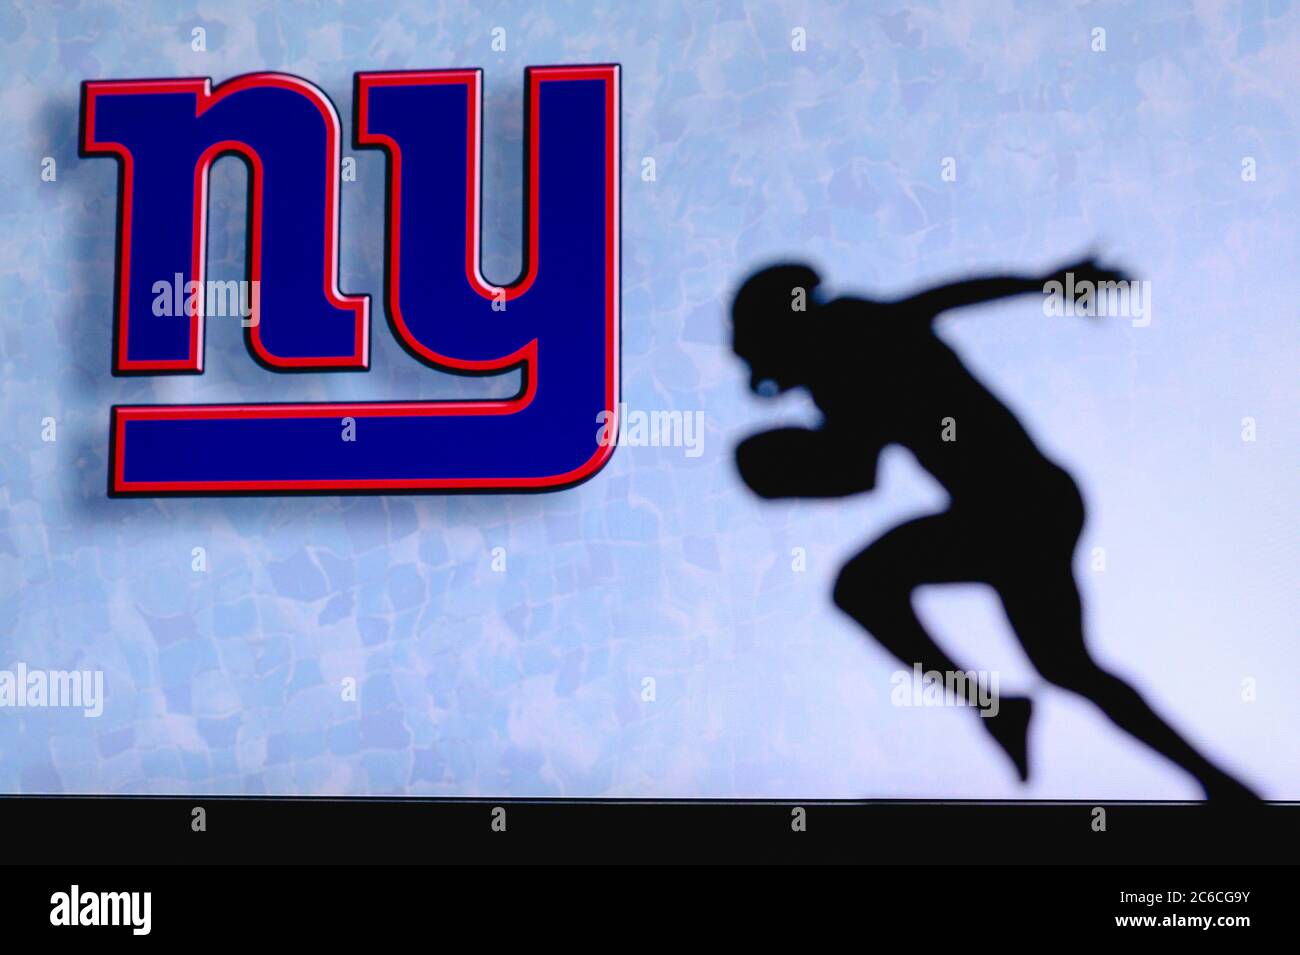 New York Giants. Silhouette of professional american football player. Logo of NFL club in background, edit space. Stock Photo